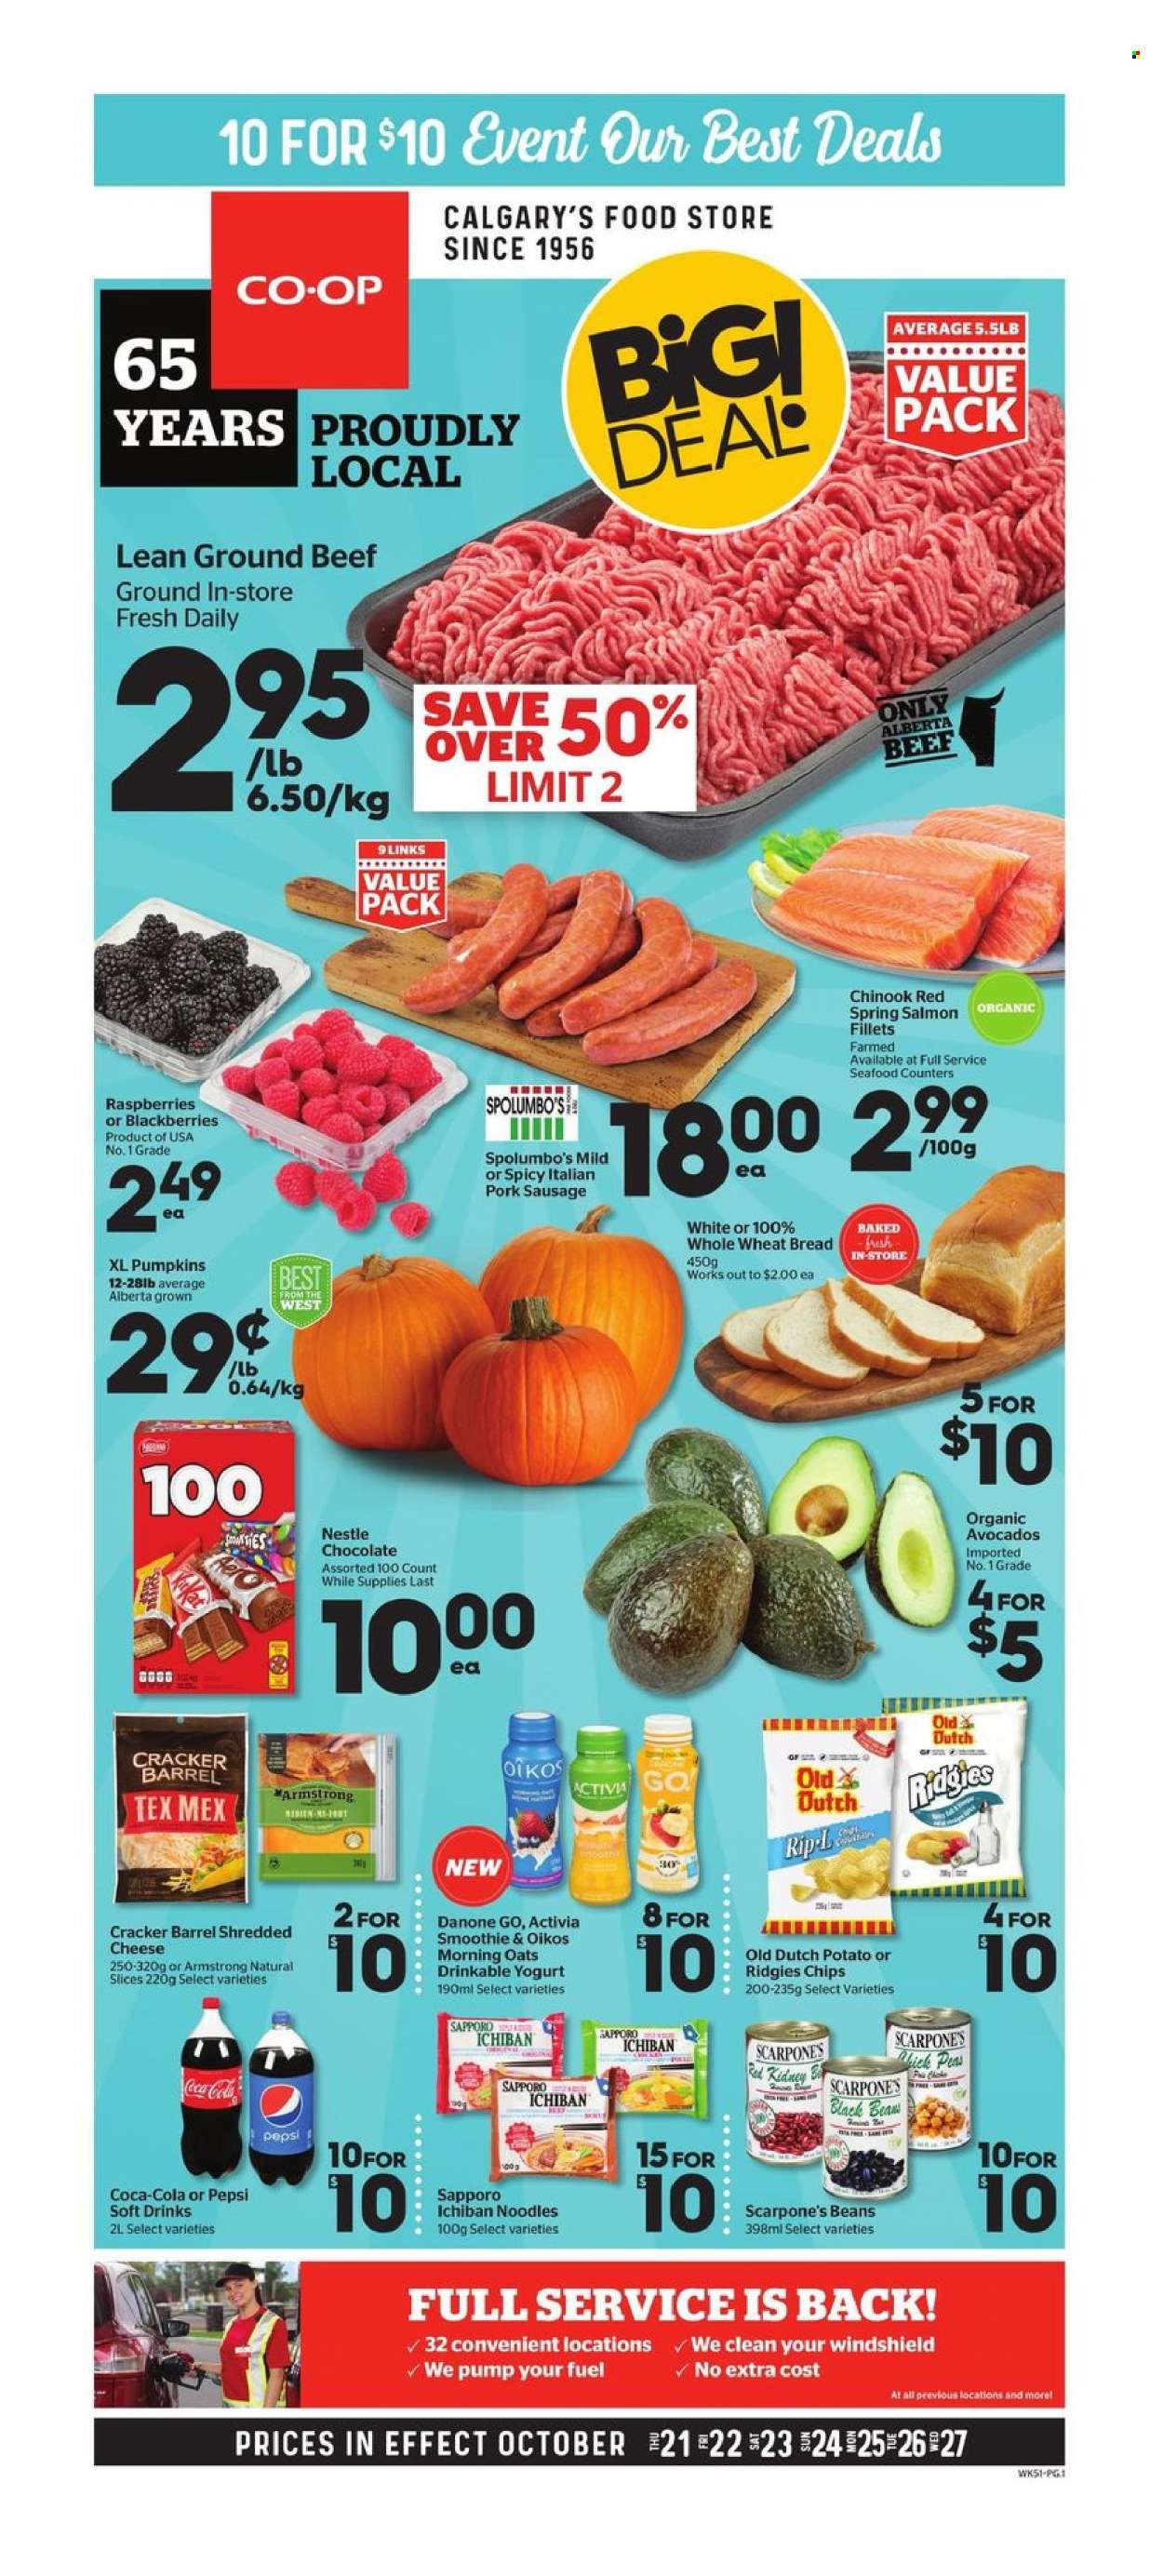 thumbnail - Calgary Co-op Flyer - October 21, 2021 - October 27, 2021 - Sales products - wheat bread, beans, pumpkin, peas, avocado, blackberries, salmon, salmon fillet, seafood, noodles, sausage, pork sausage, shredded cheese, yoghurt, Activia, Oikos, chocolate, crackers, oats, Coca-Cola, Pepsi, soft drink, smoothie, beef meat, ground beef, Danone, Nestlé, chips. Page 1.